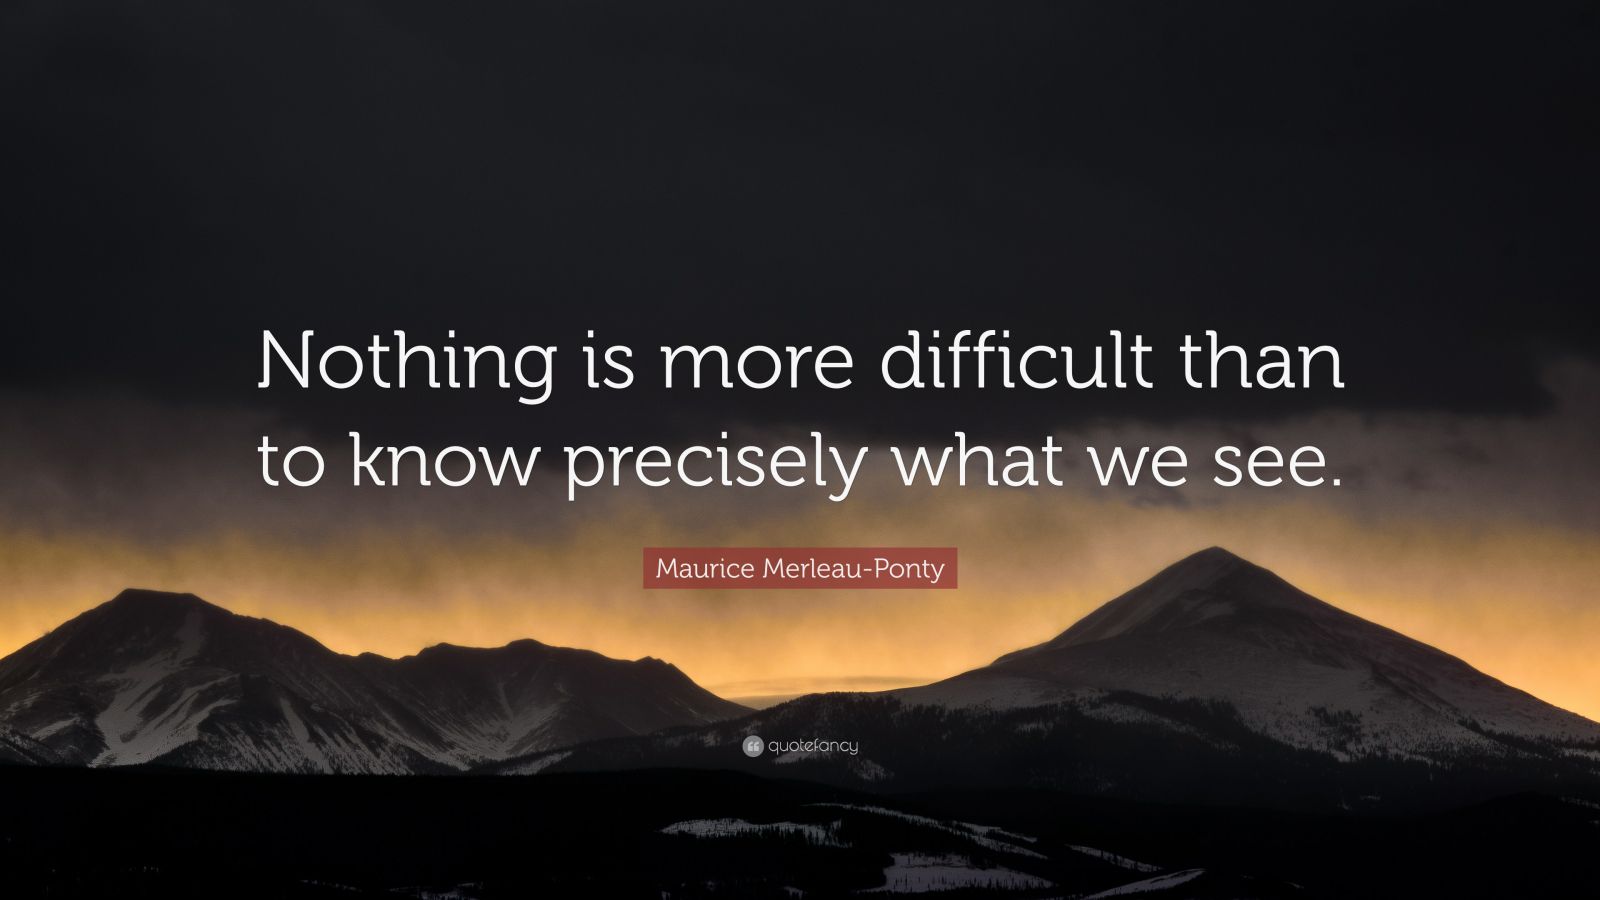 Top 50 Maurice Merleau-Ponty Quotes | 2021 Edition | Free Images ...